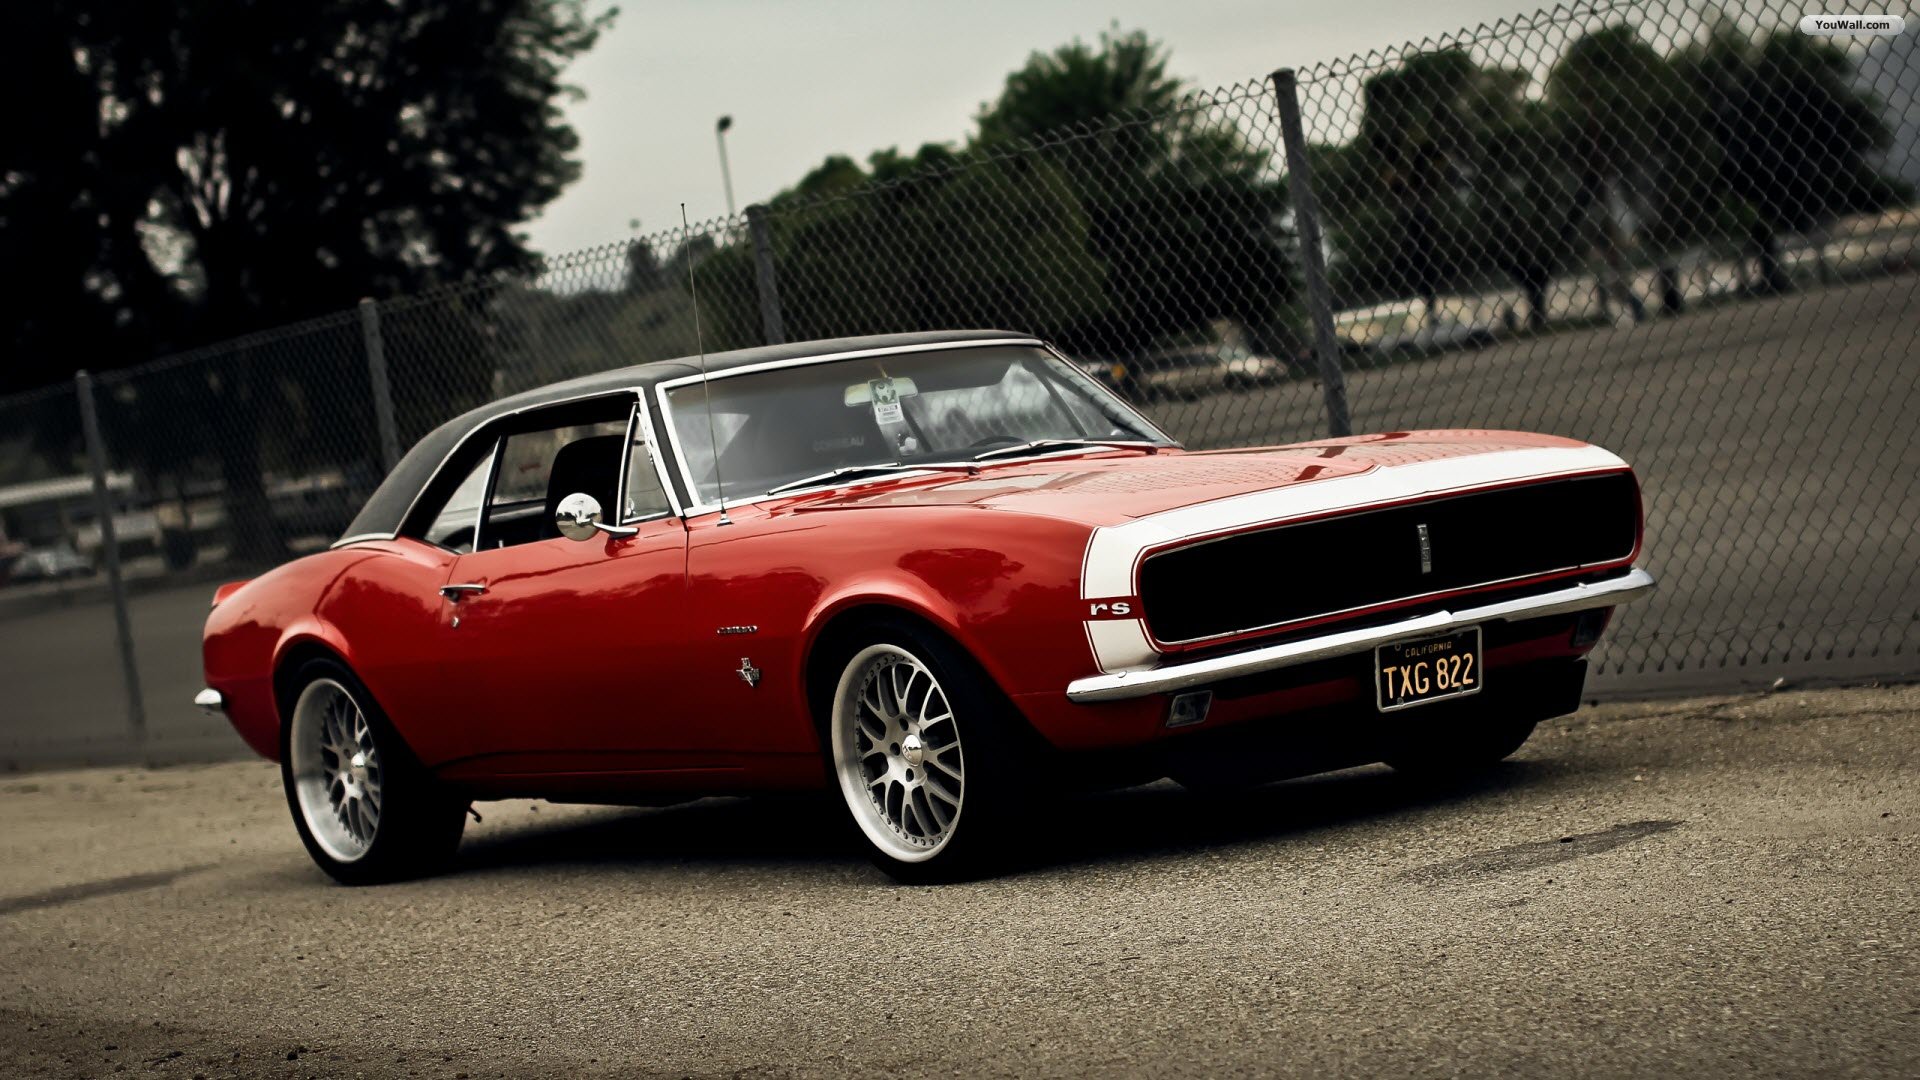 Home CarsHD Wallpaper Classic Muscle Car